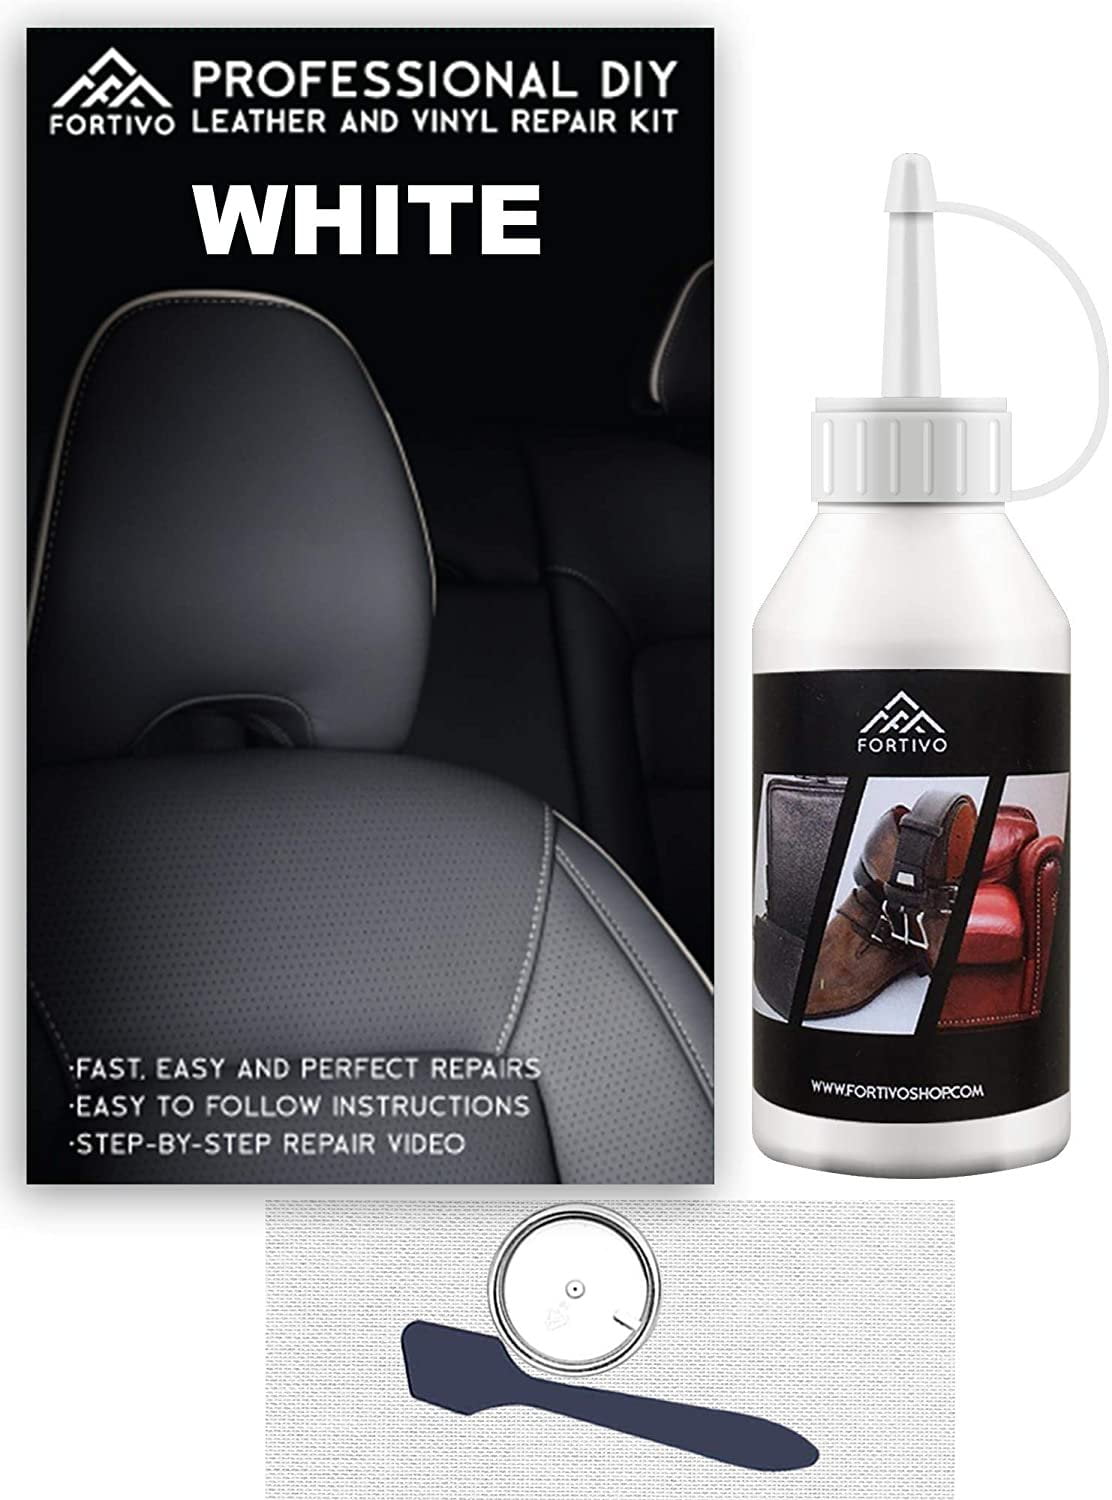 White Leather Vinyl Repair Kit, Best Leather Couch Repair Kit